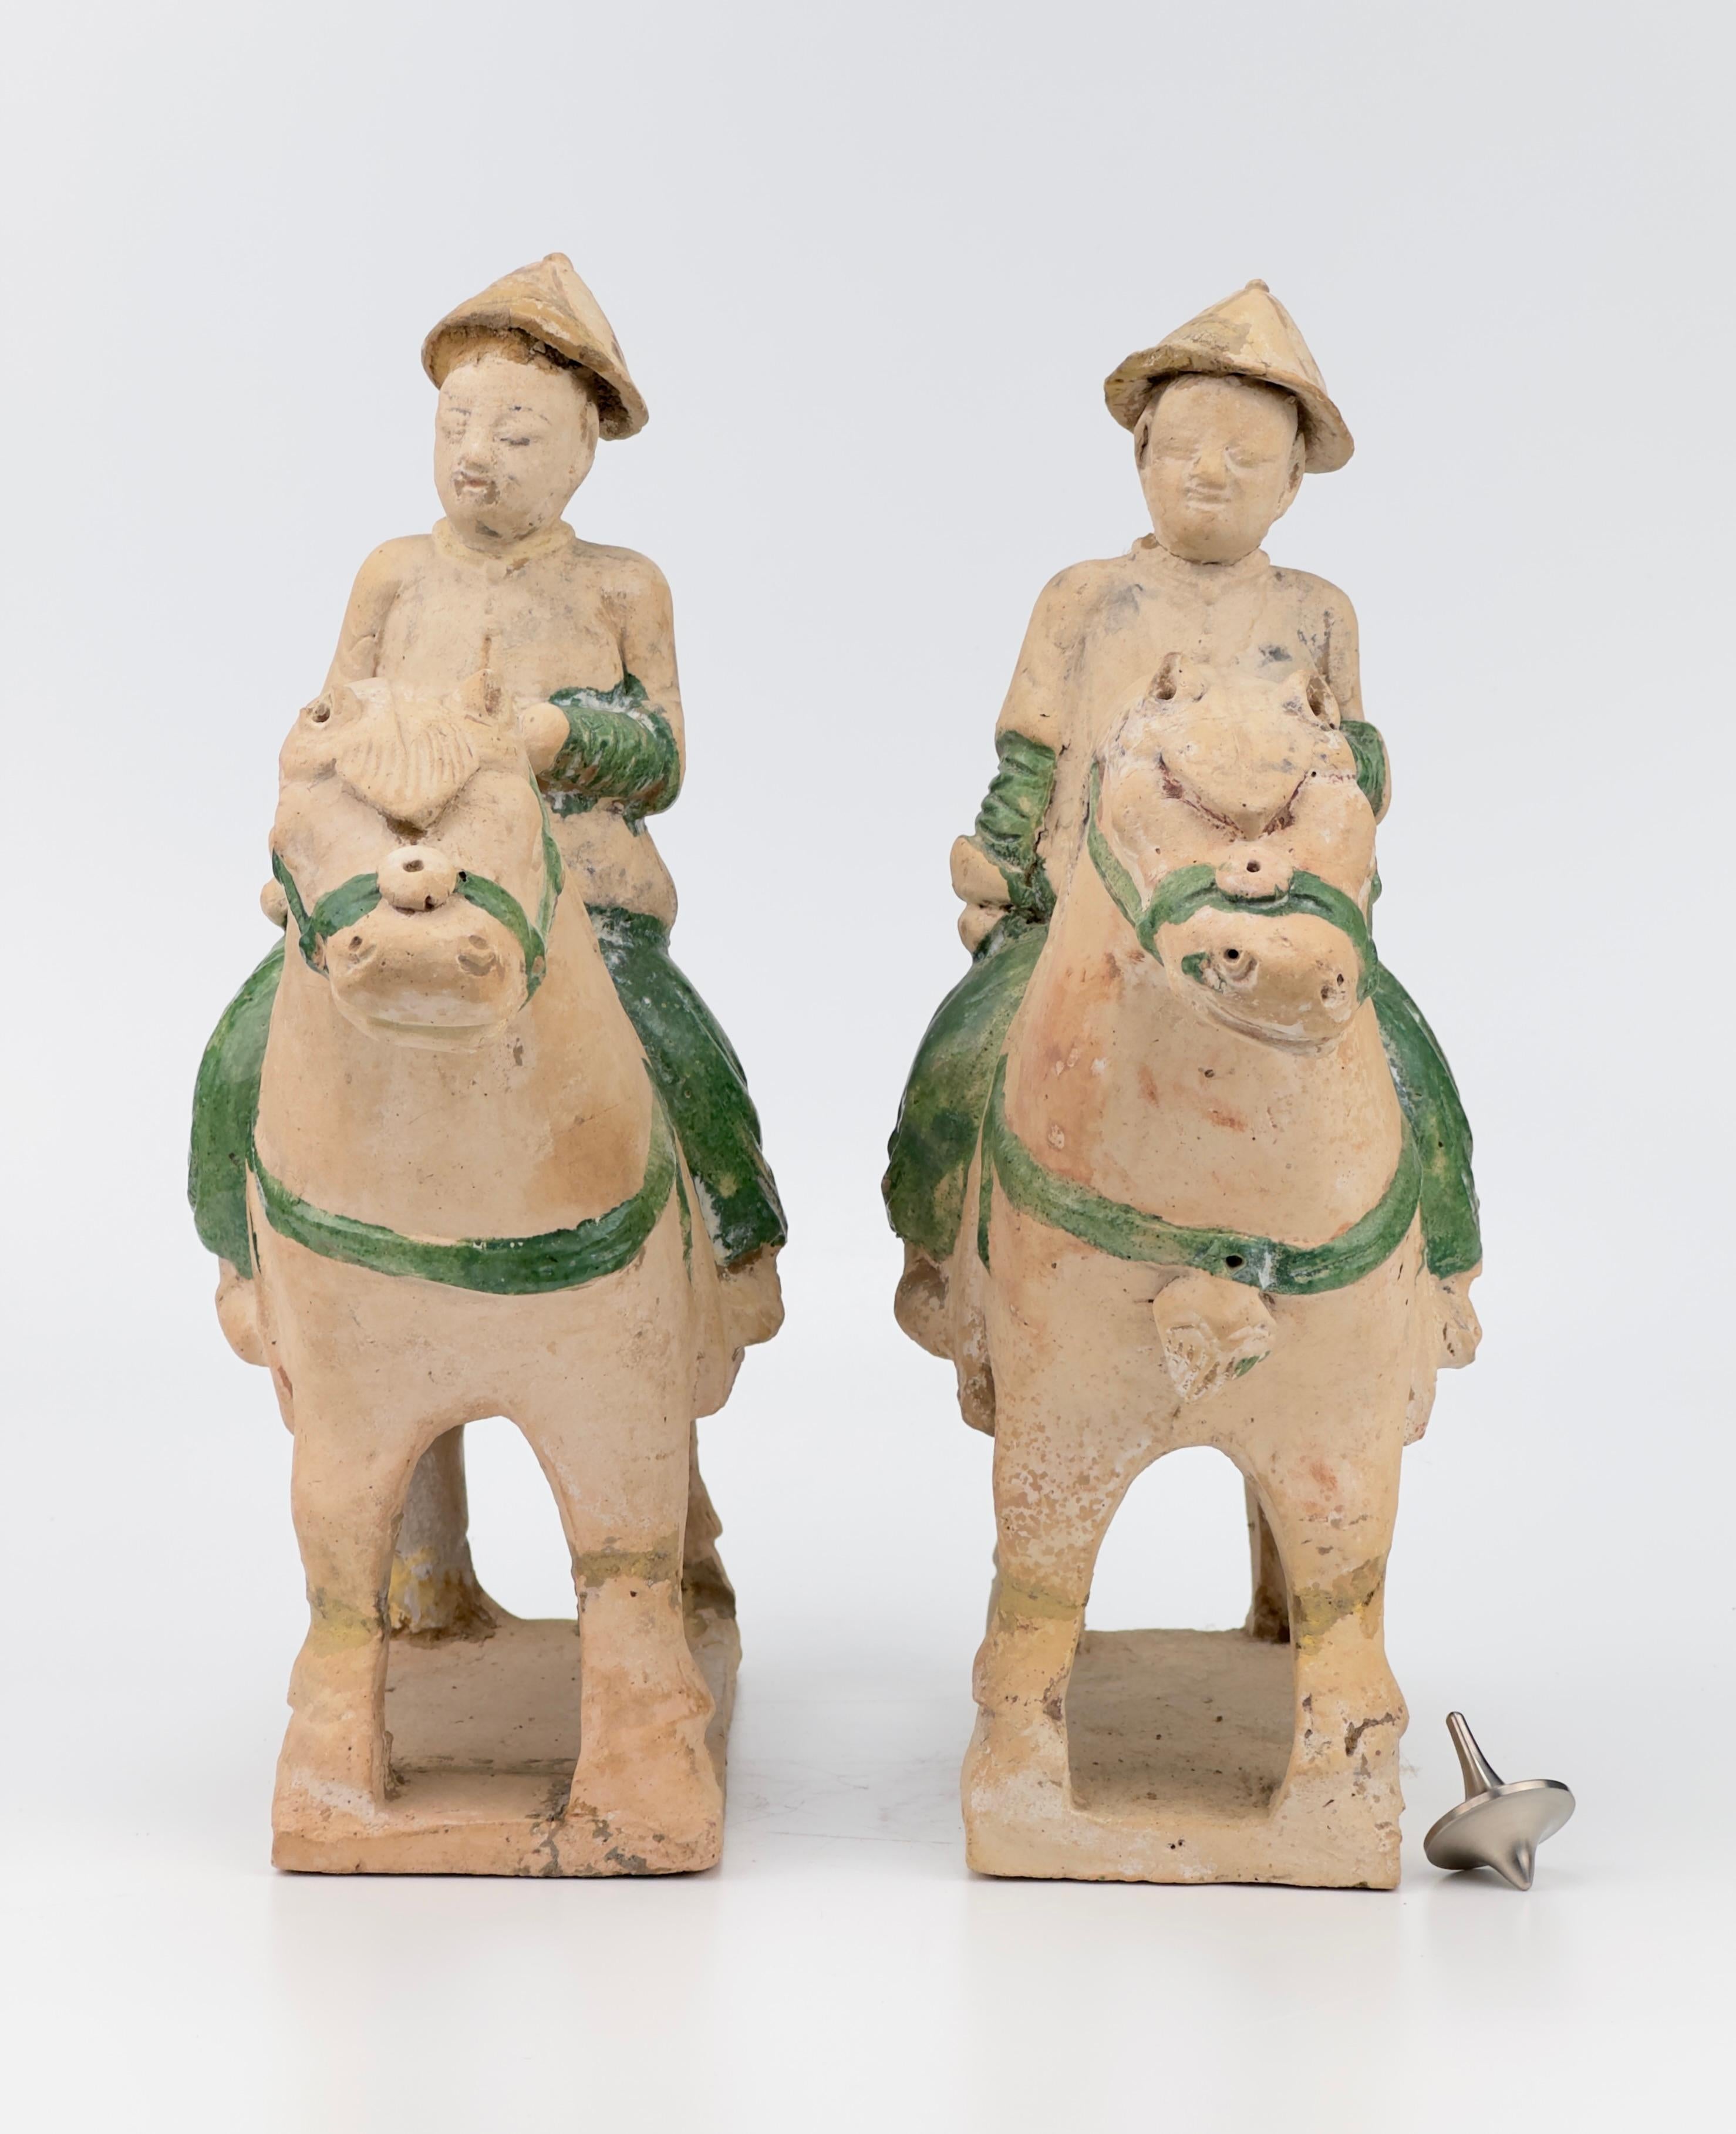 Statues of Chinese horse riders, featuring glazes in green, are set on rectangular bases. 

 

Period: Ming Dynasty 
Medium: Green-glazed Pottery
Type: Figure
Provenance : Acquired in early 2000s from Hongkong

 

* Ming Dynasty Green-glazed pottery